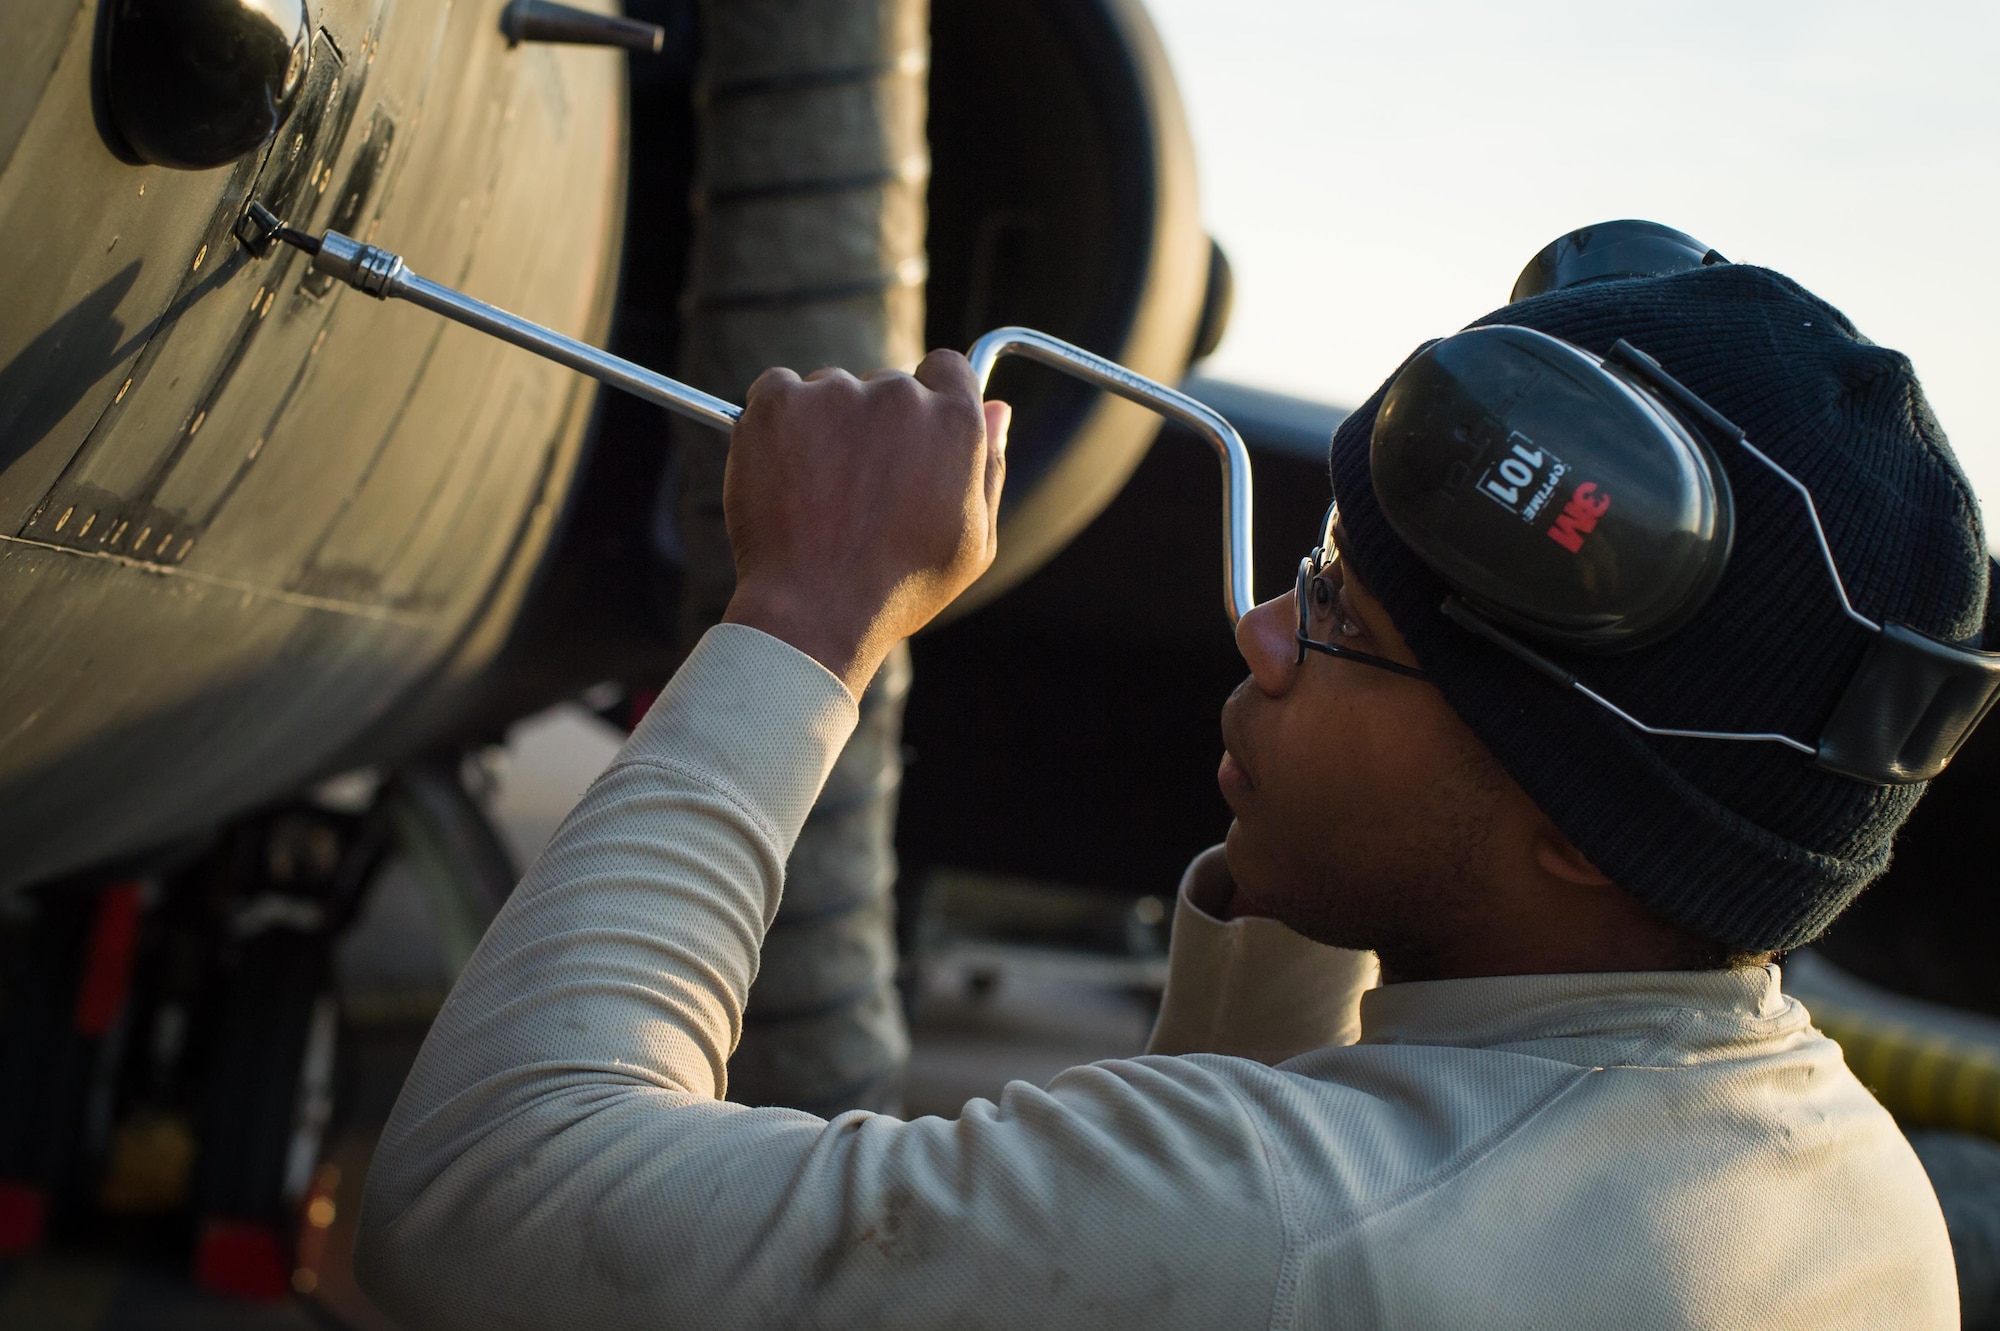 Senior Airman Anthony, 380th Expeditionary Aircraft Maintenance Squadron maintainer, completes a preflight inspection before a sortie in support of Combined Joint Task Force-Operation inherent Resolve at an undisclosed location in Southwest Asia, Feb. 2, 2017. The U-2 is providing intelligence, surveillance and reconnaissance information to Coalition partners in Air Force Central Command. (U.S. Air Force photo/Senior Airman Tyler Woodward)